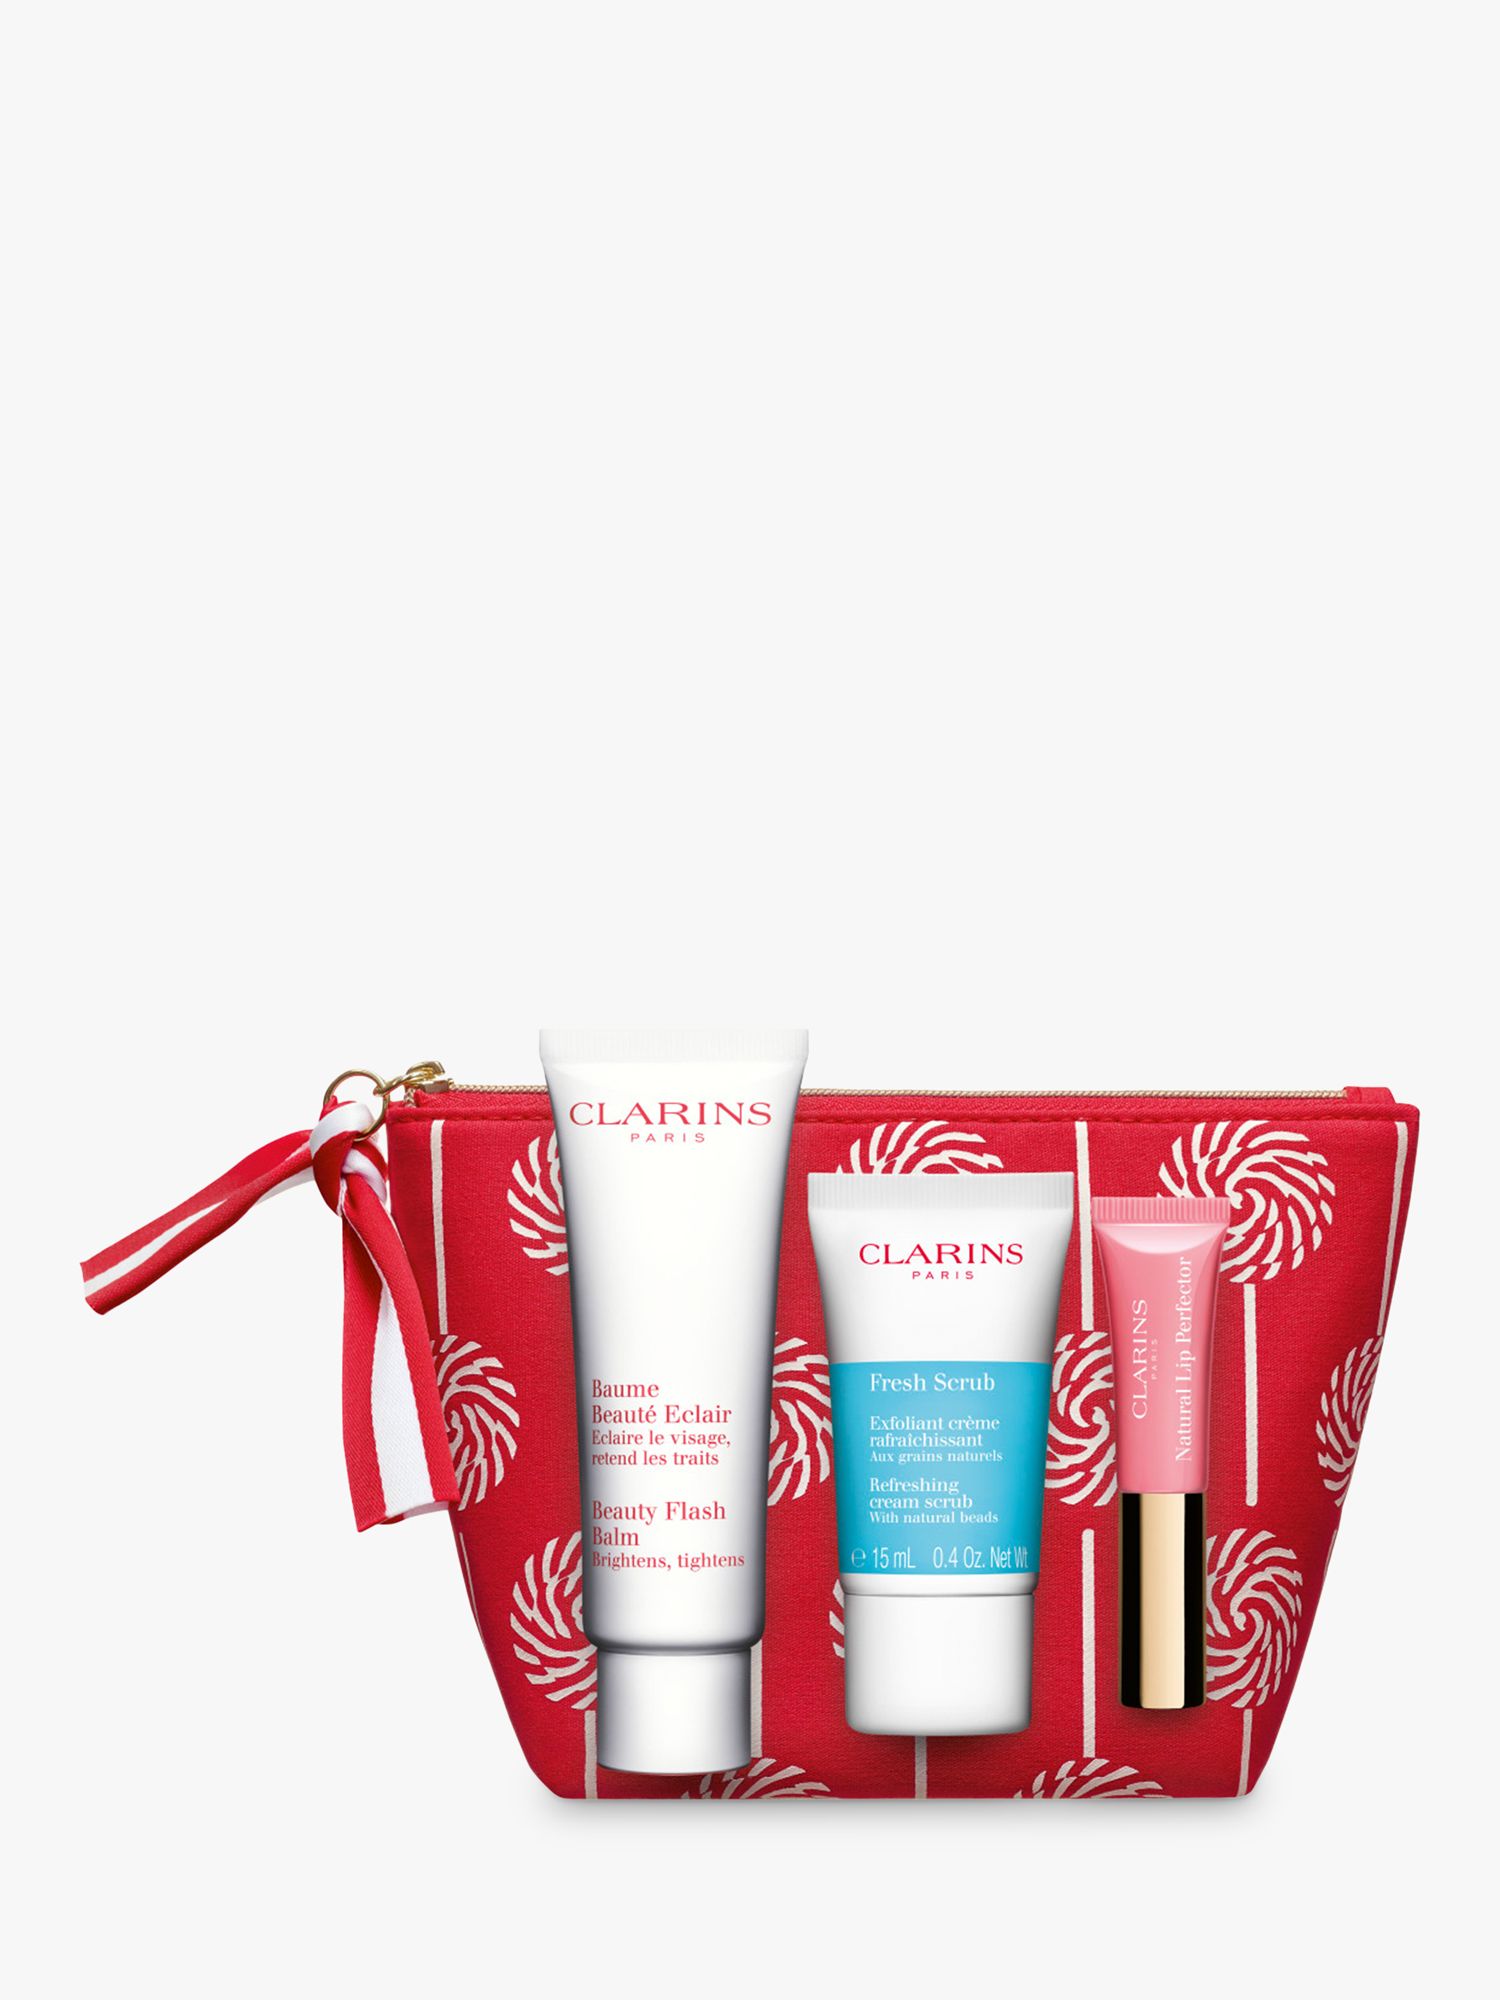 Clarins Beauty Flash Collection Skincare Gift Set at John